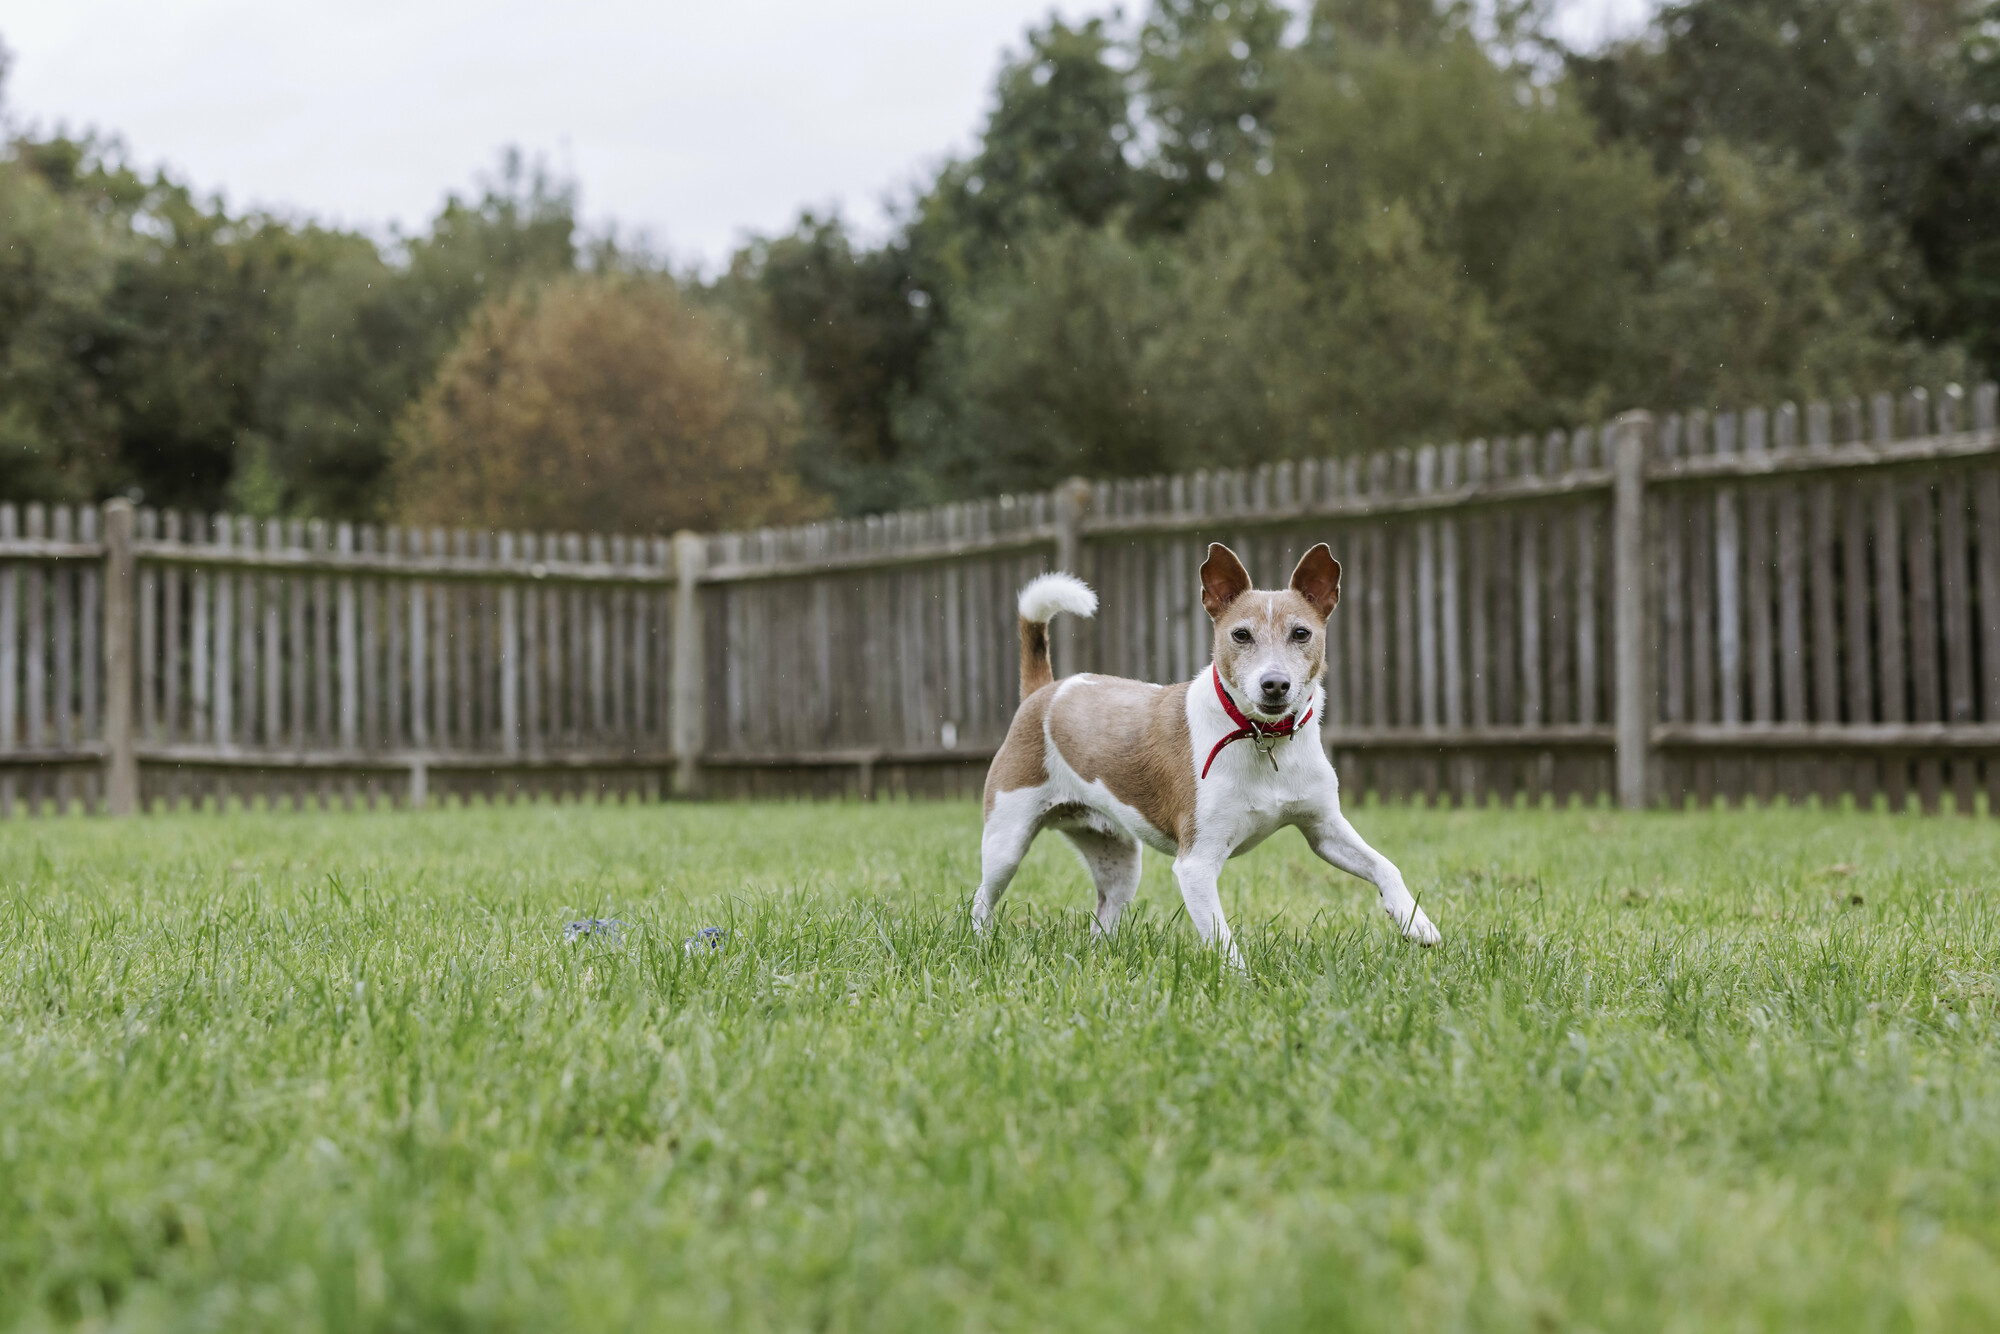 Jack russell terrier Hero runs through a grassy paddock surrounded by a wooden fence